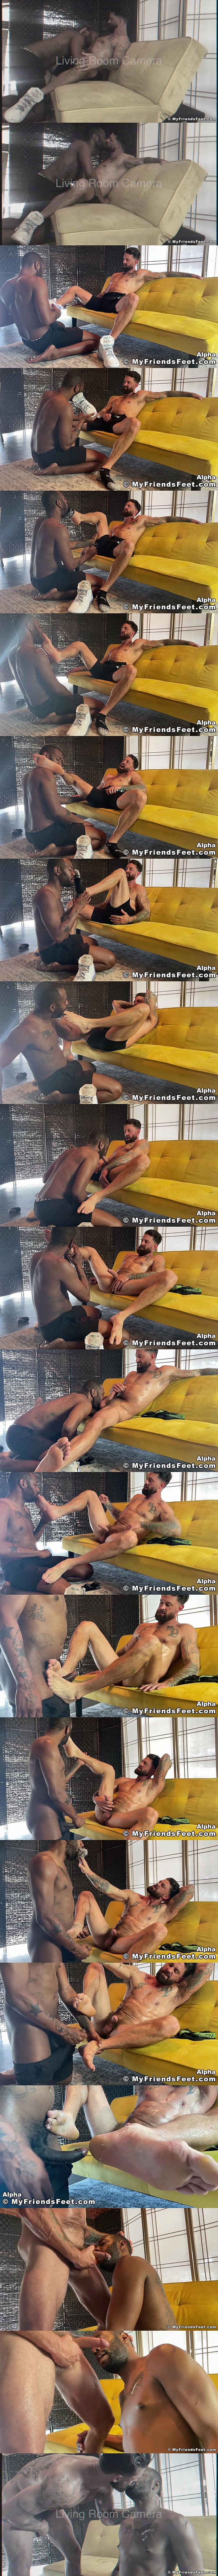 August Alexander sniffs, worships and licks macho hunk Alpha Wolfe's socks and size 13 bare feet before they blow their loads in Alpha's Big Feet Worshiped at Myfriendsfeet 01